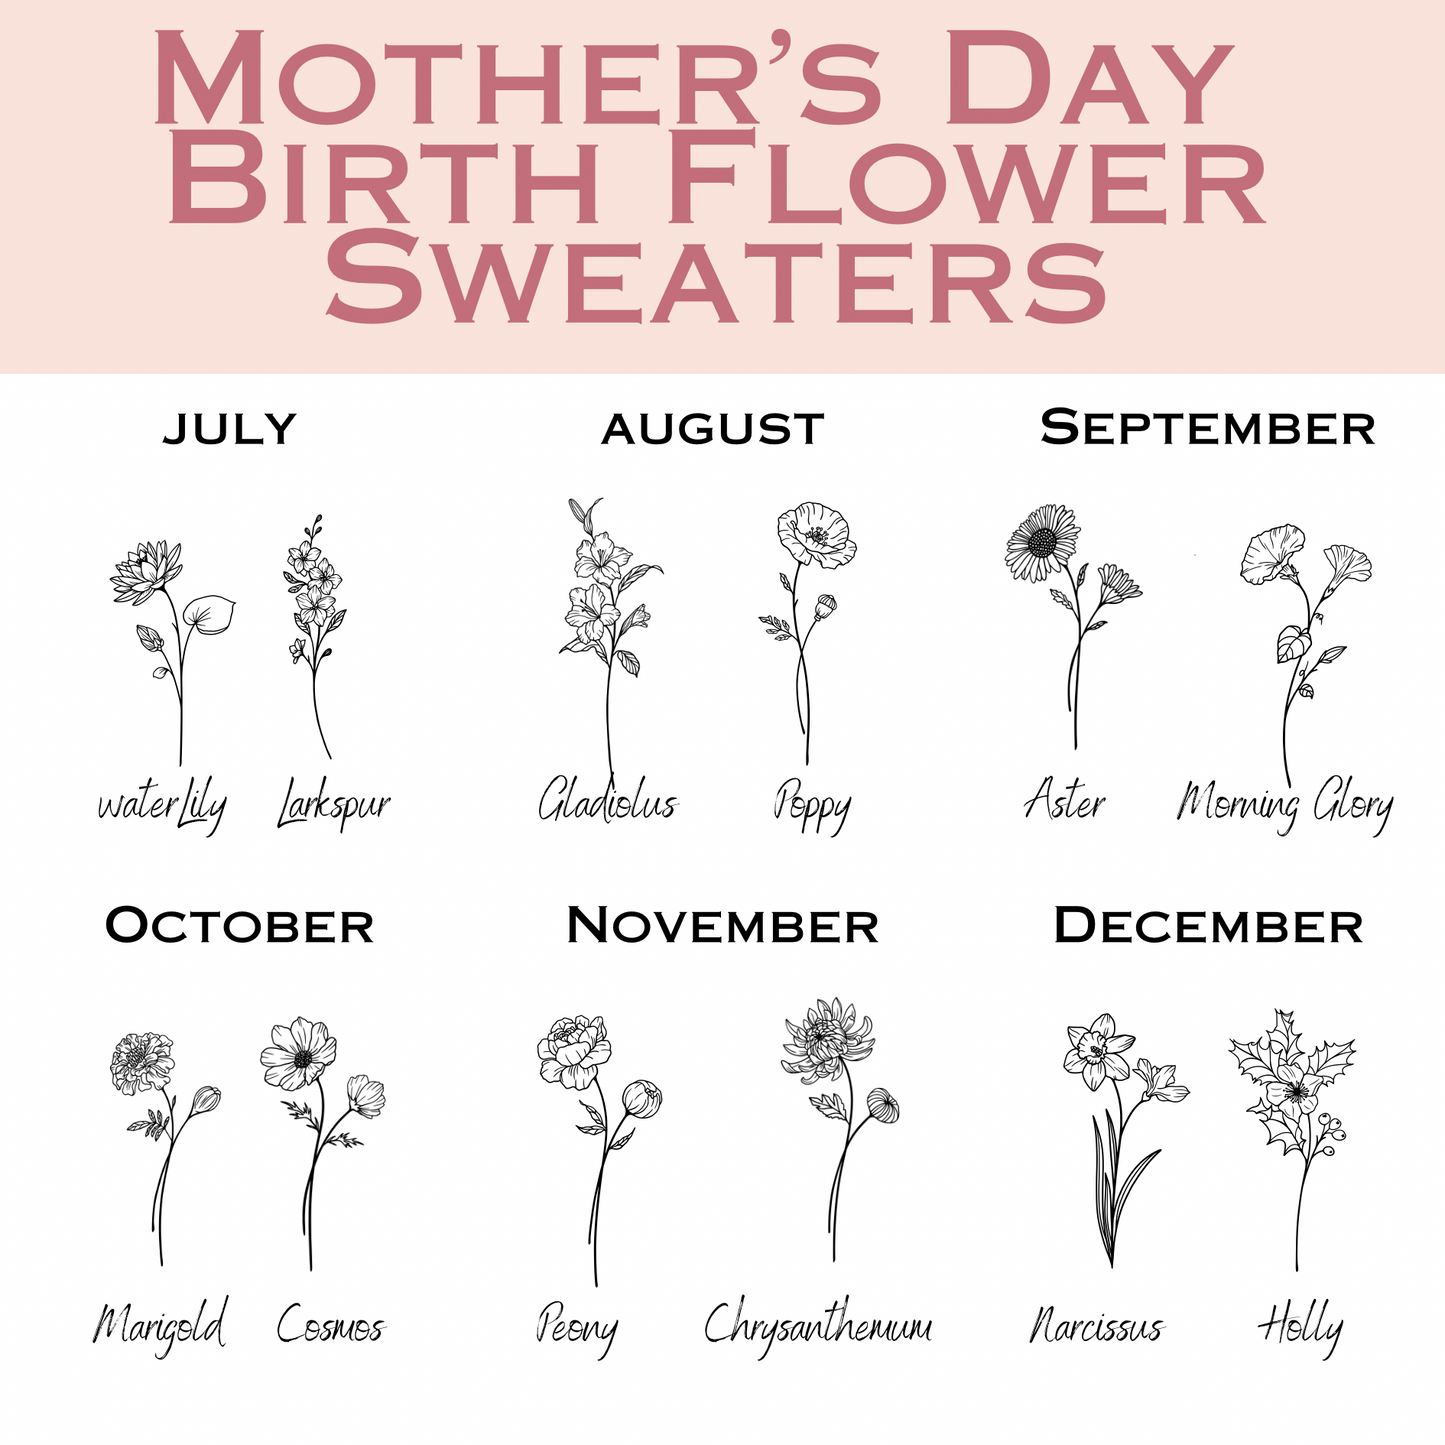 Sweatshirts - Mothers Day Birth Flower - (Made To Order)